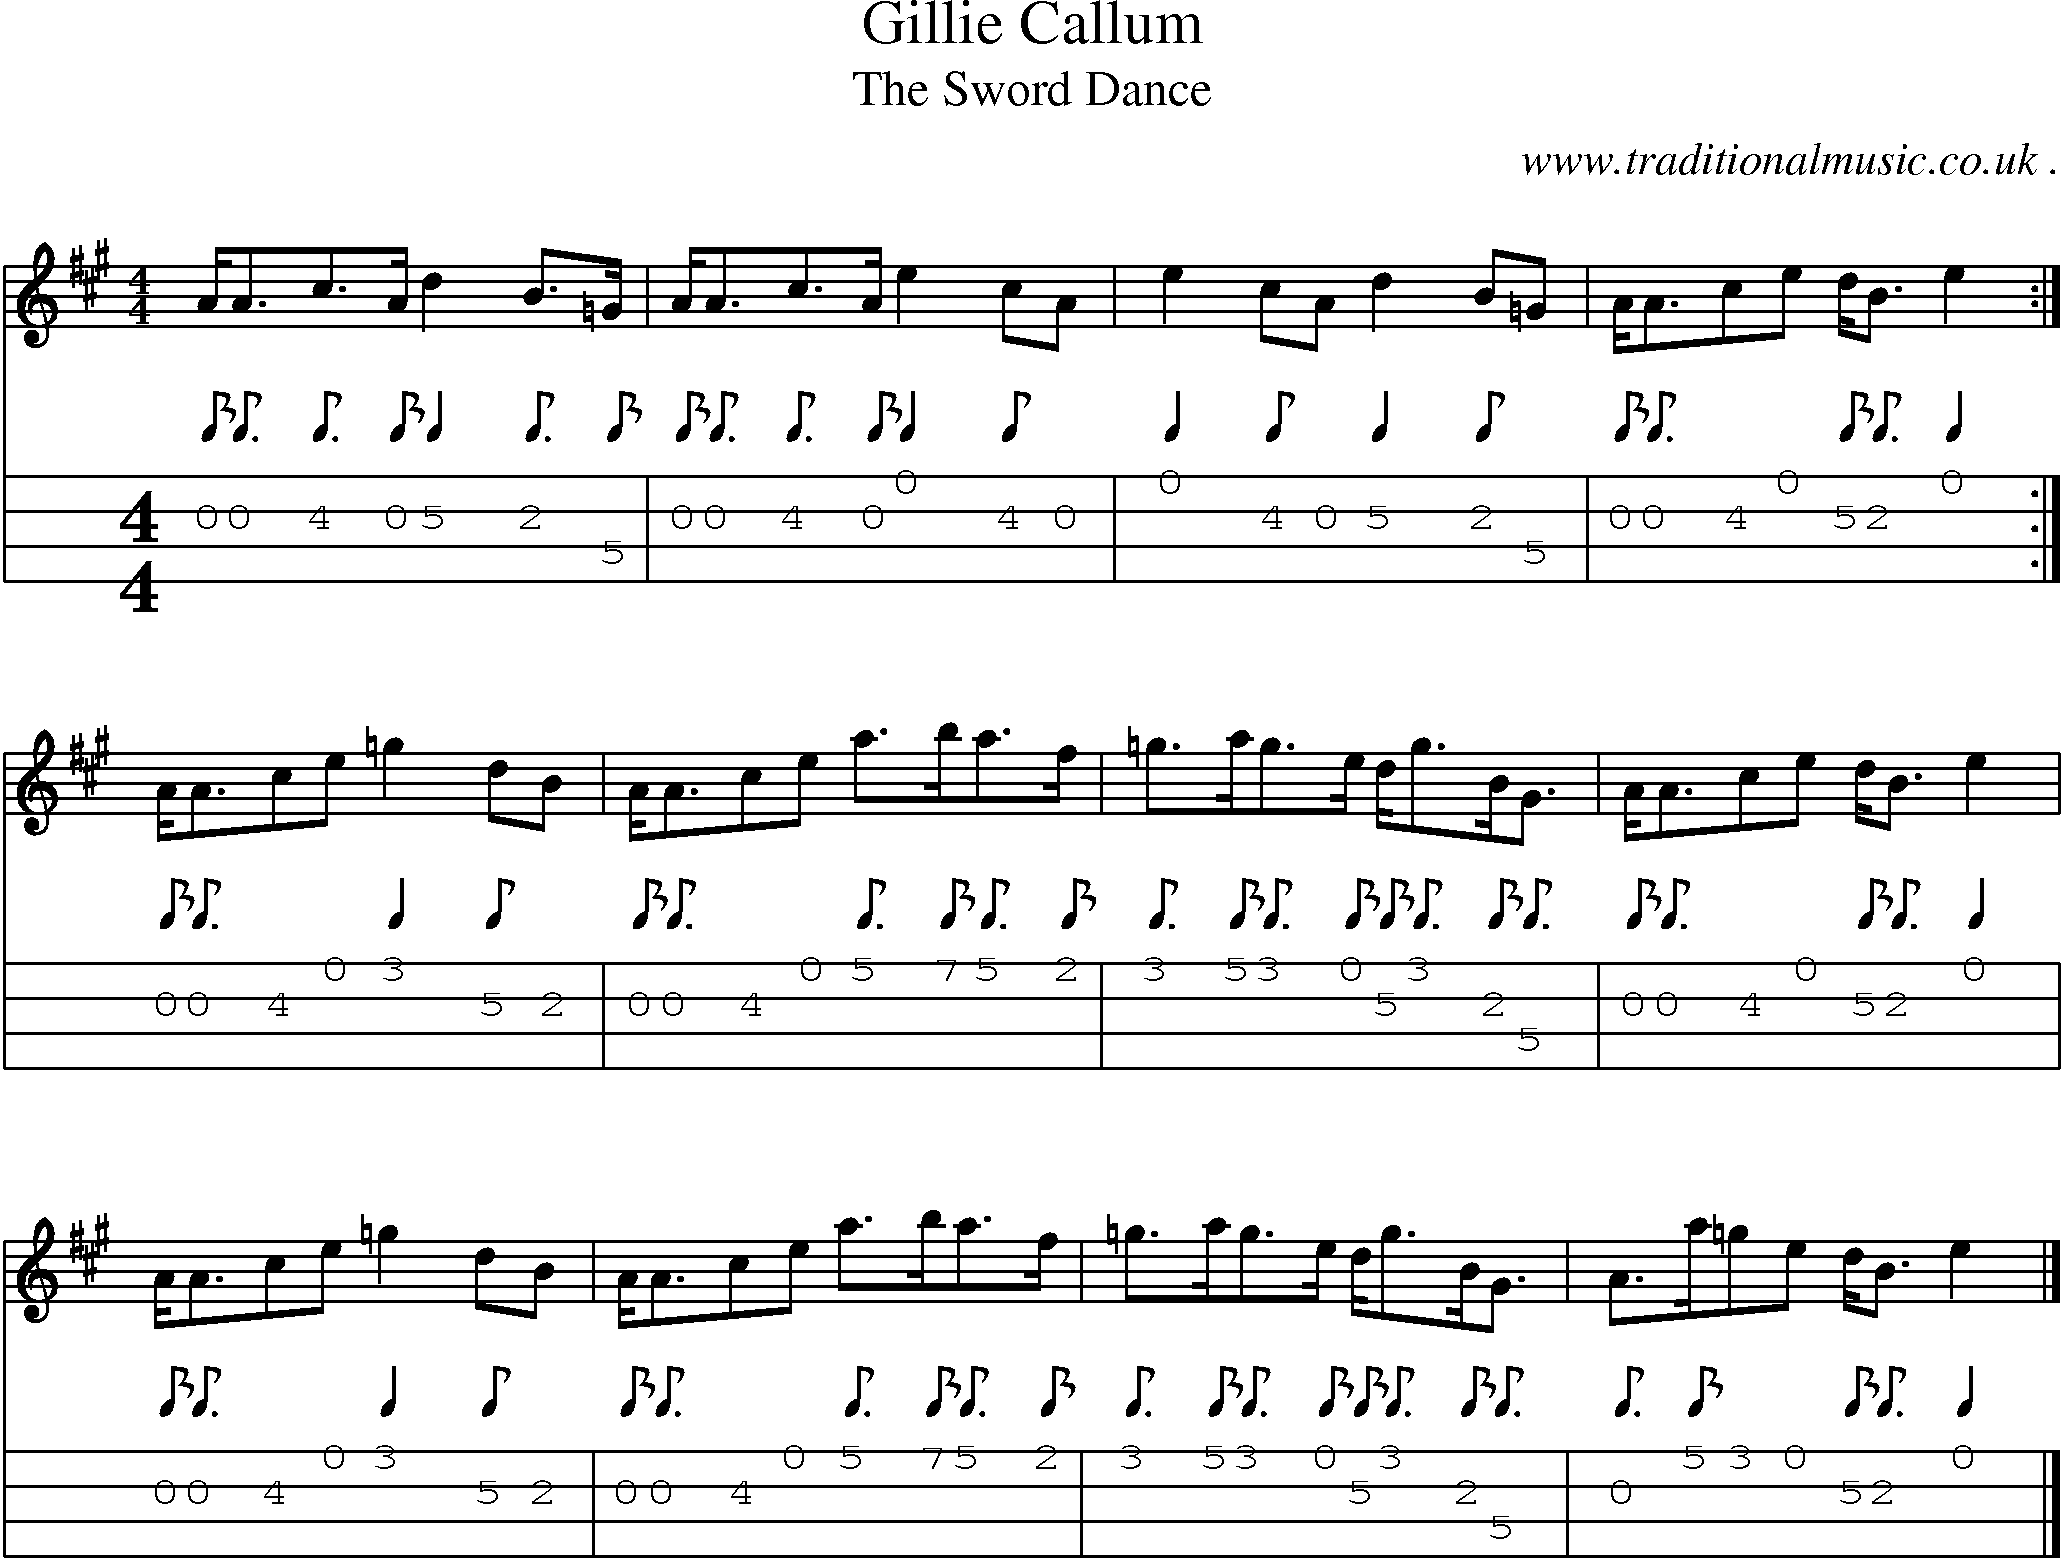 Sheet-music  score, Chords and Mandolin Tabs for Gillie Callum